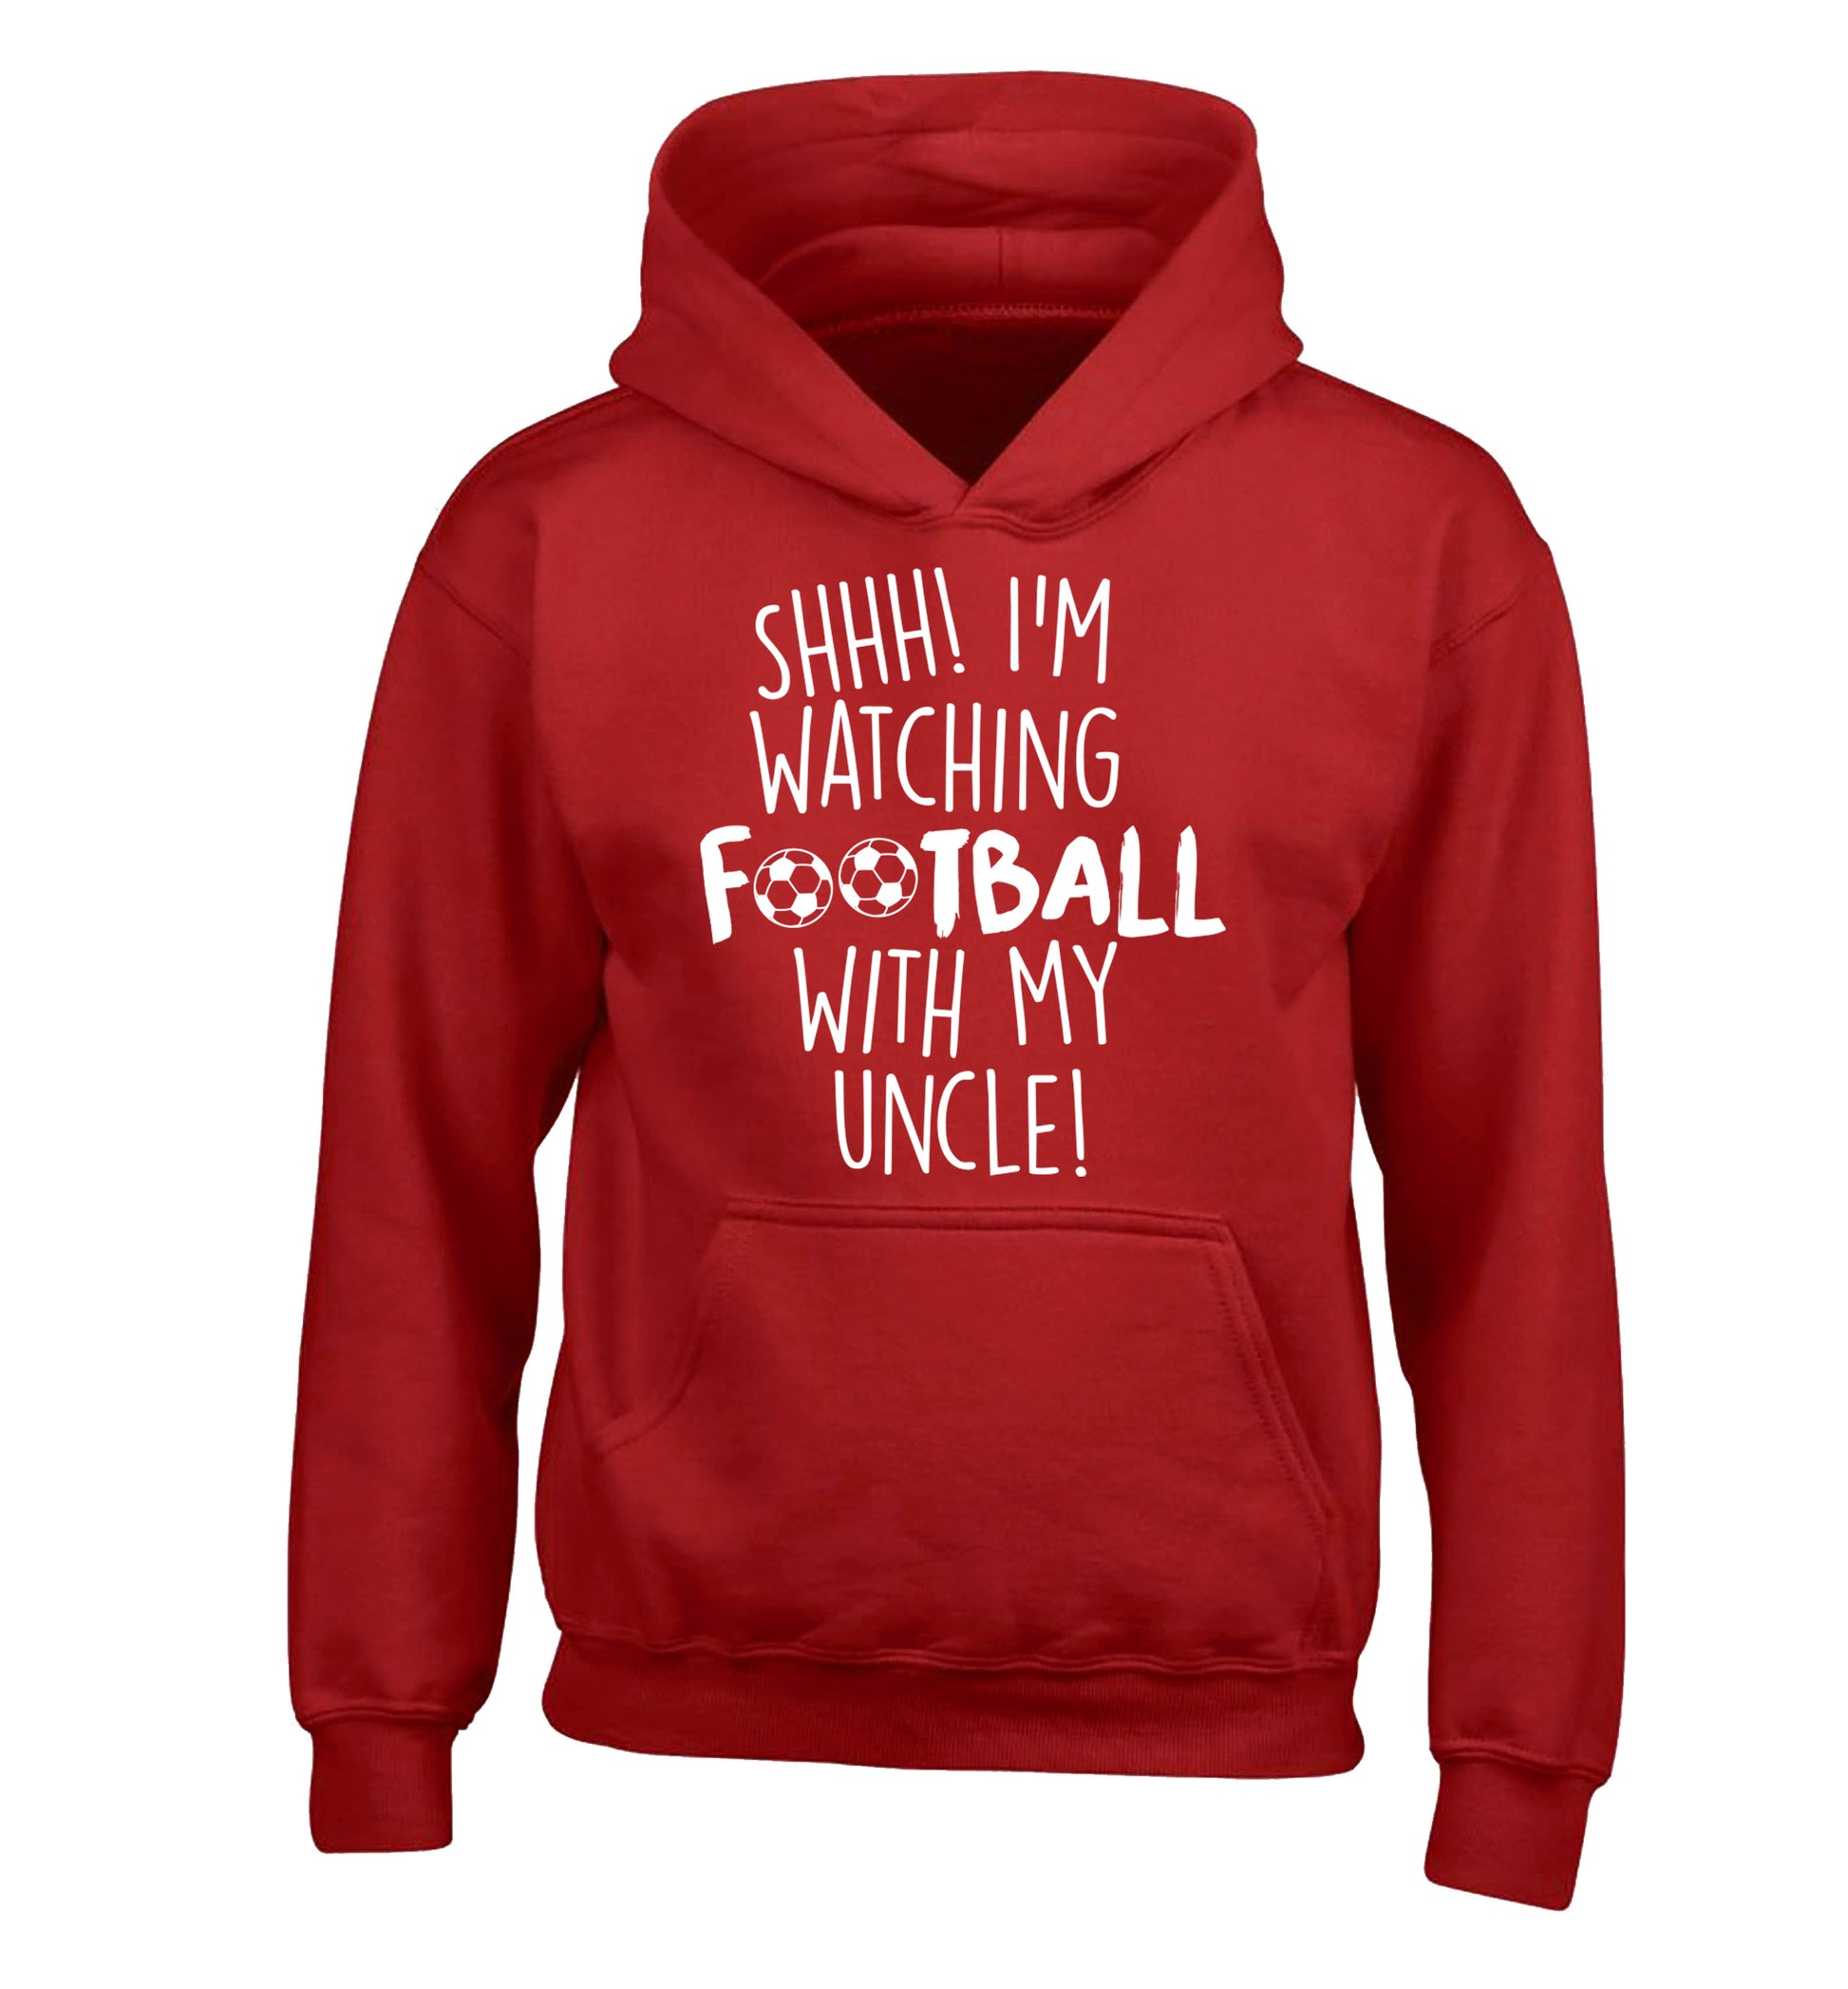 Shhh I'm watching football with my uncle children's red hoodie 12-14 Years